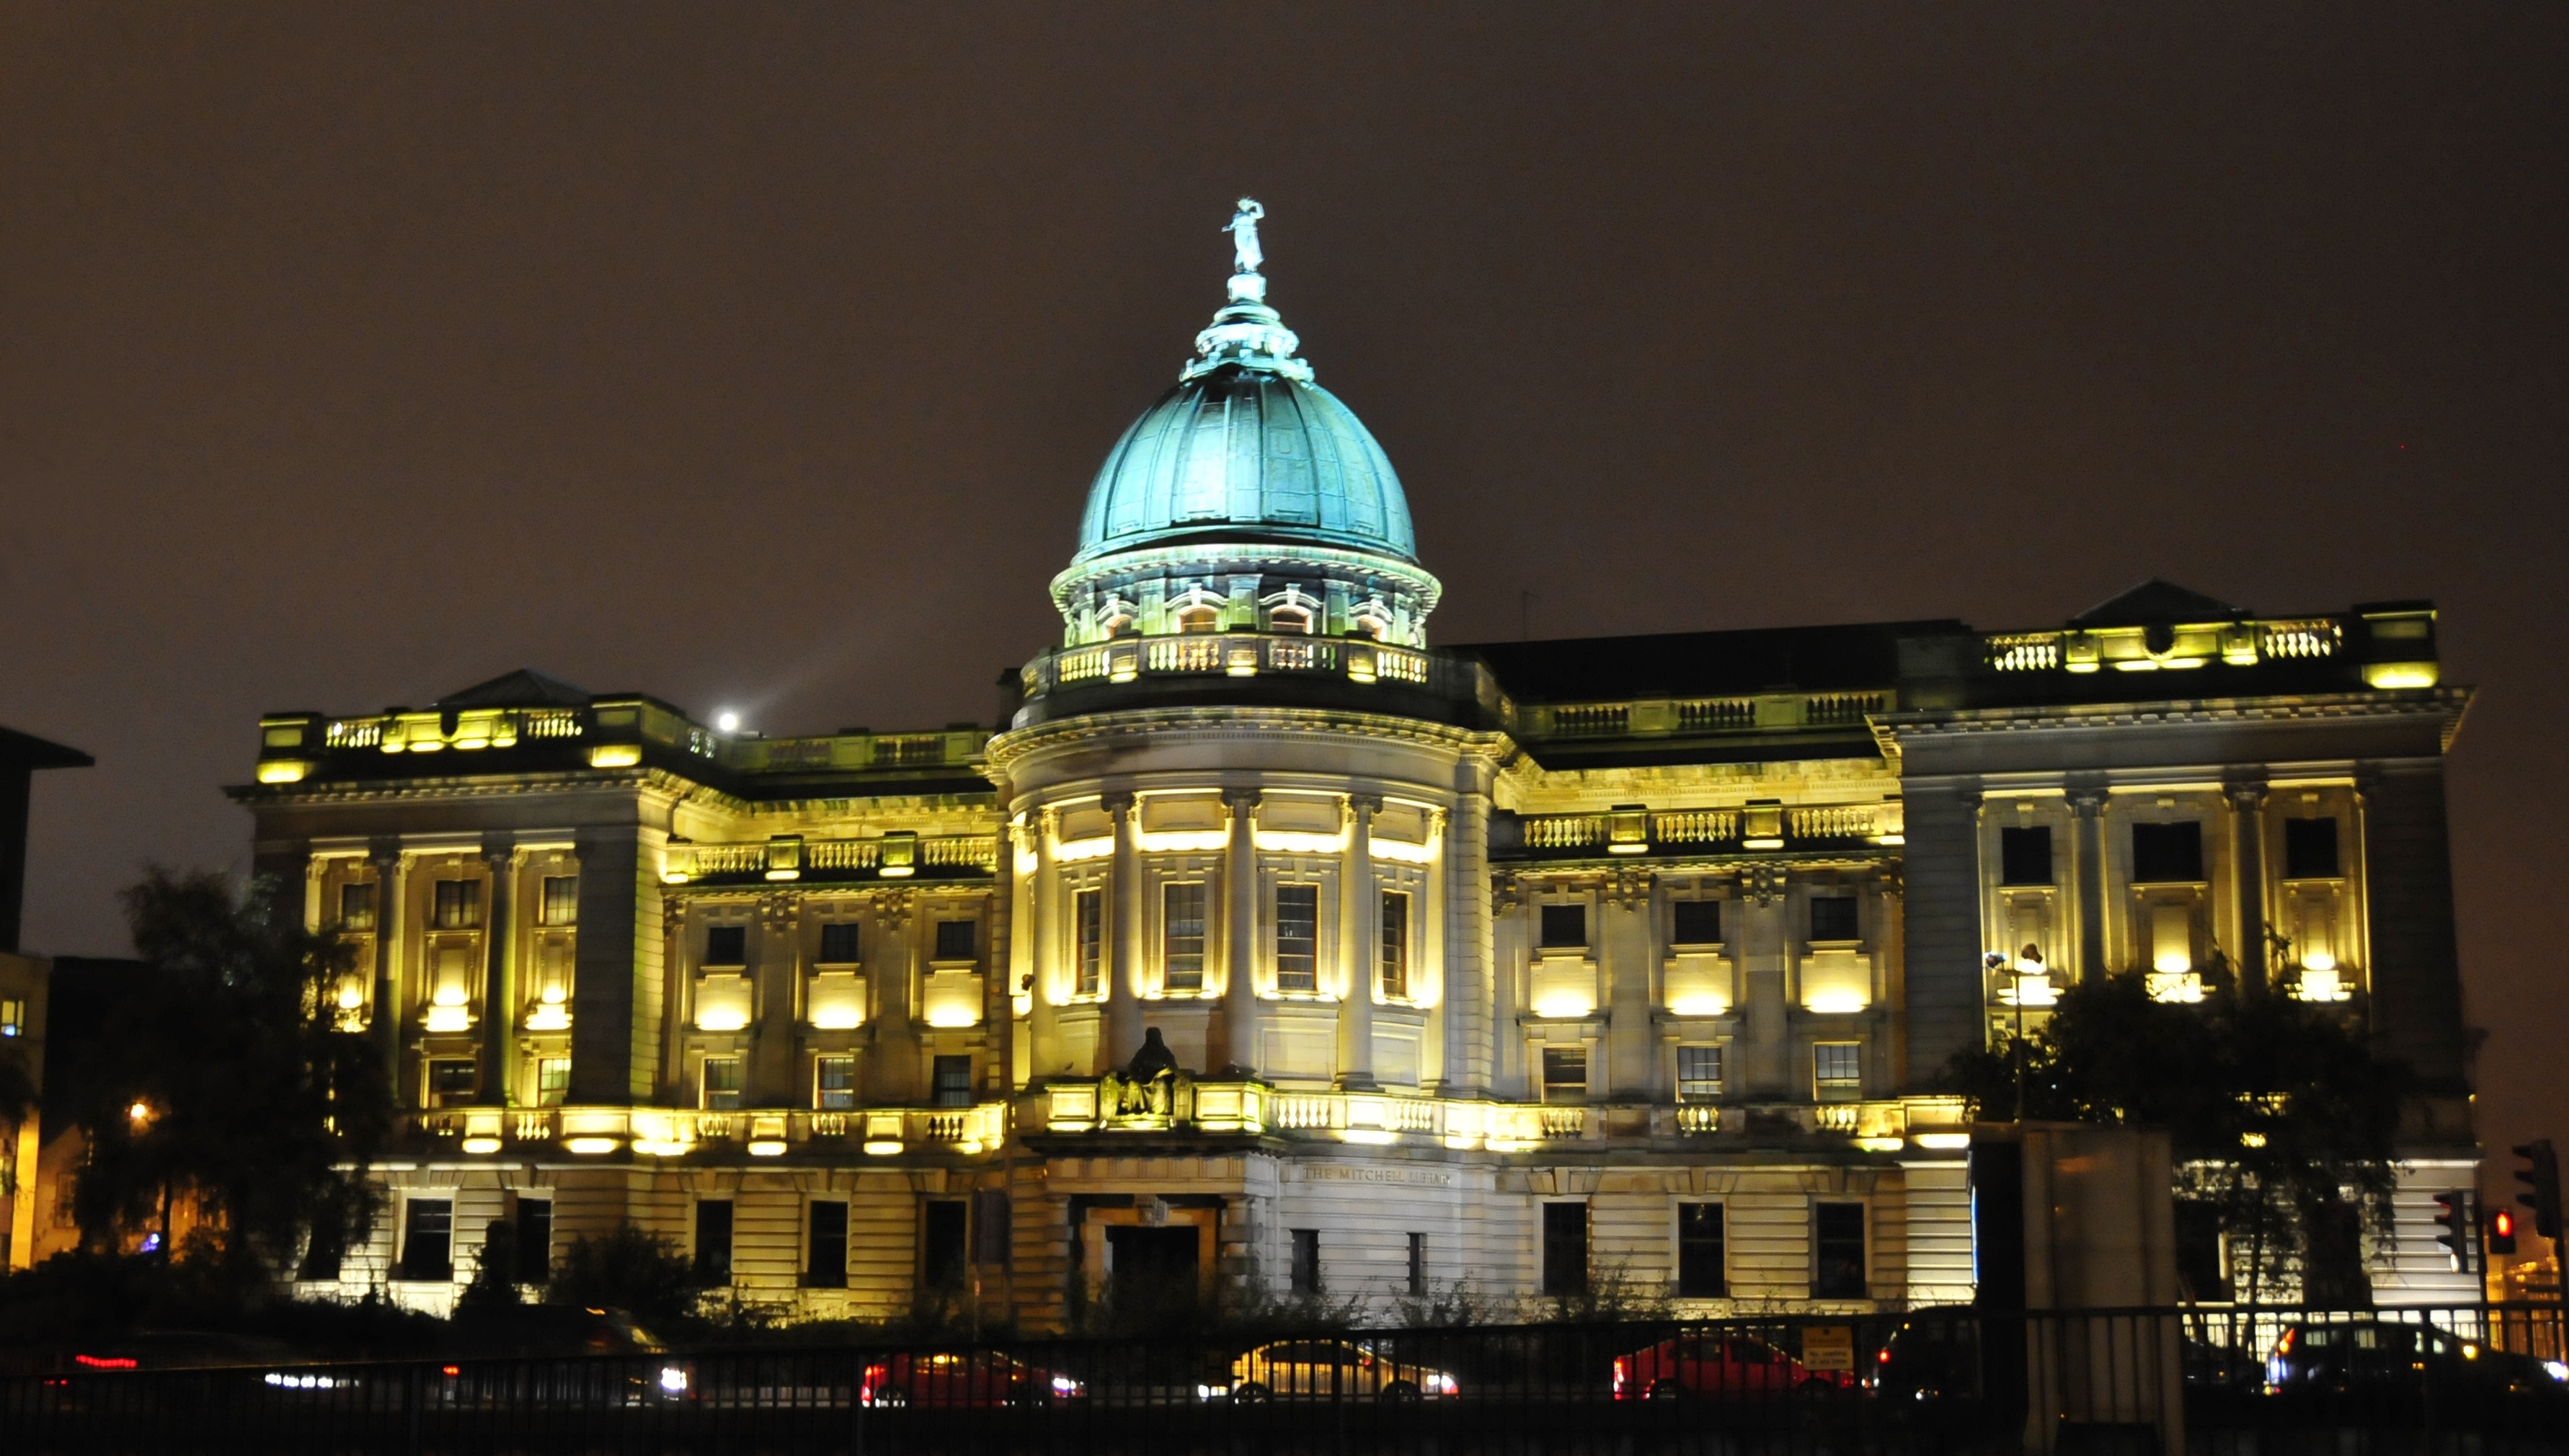 Mitchell Library at night